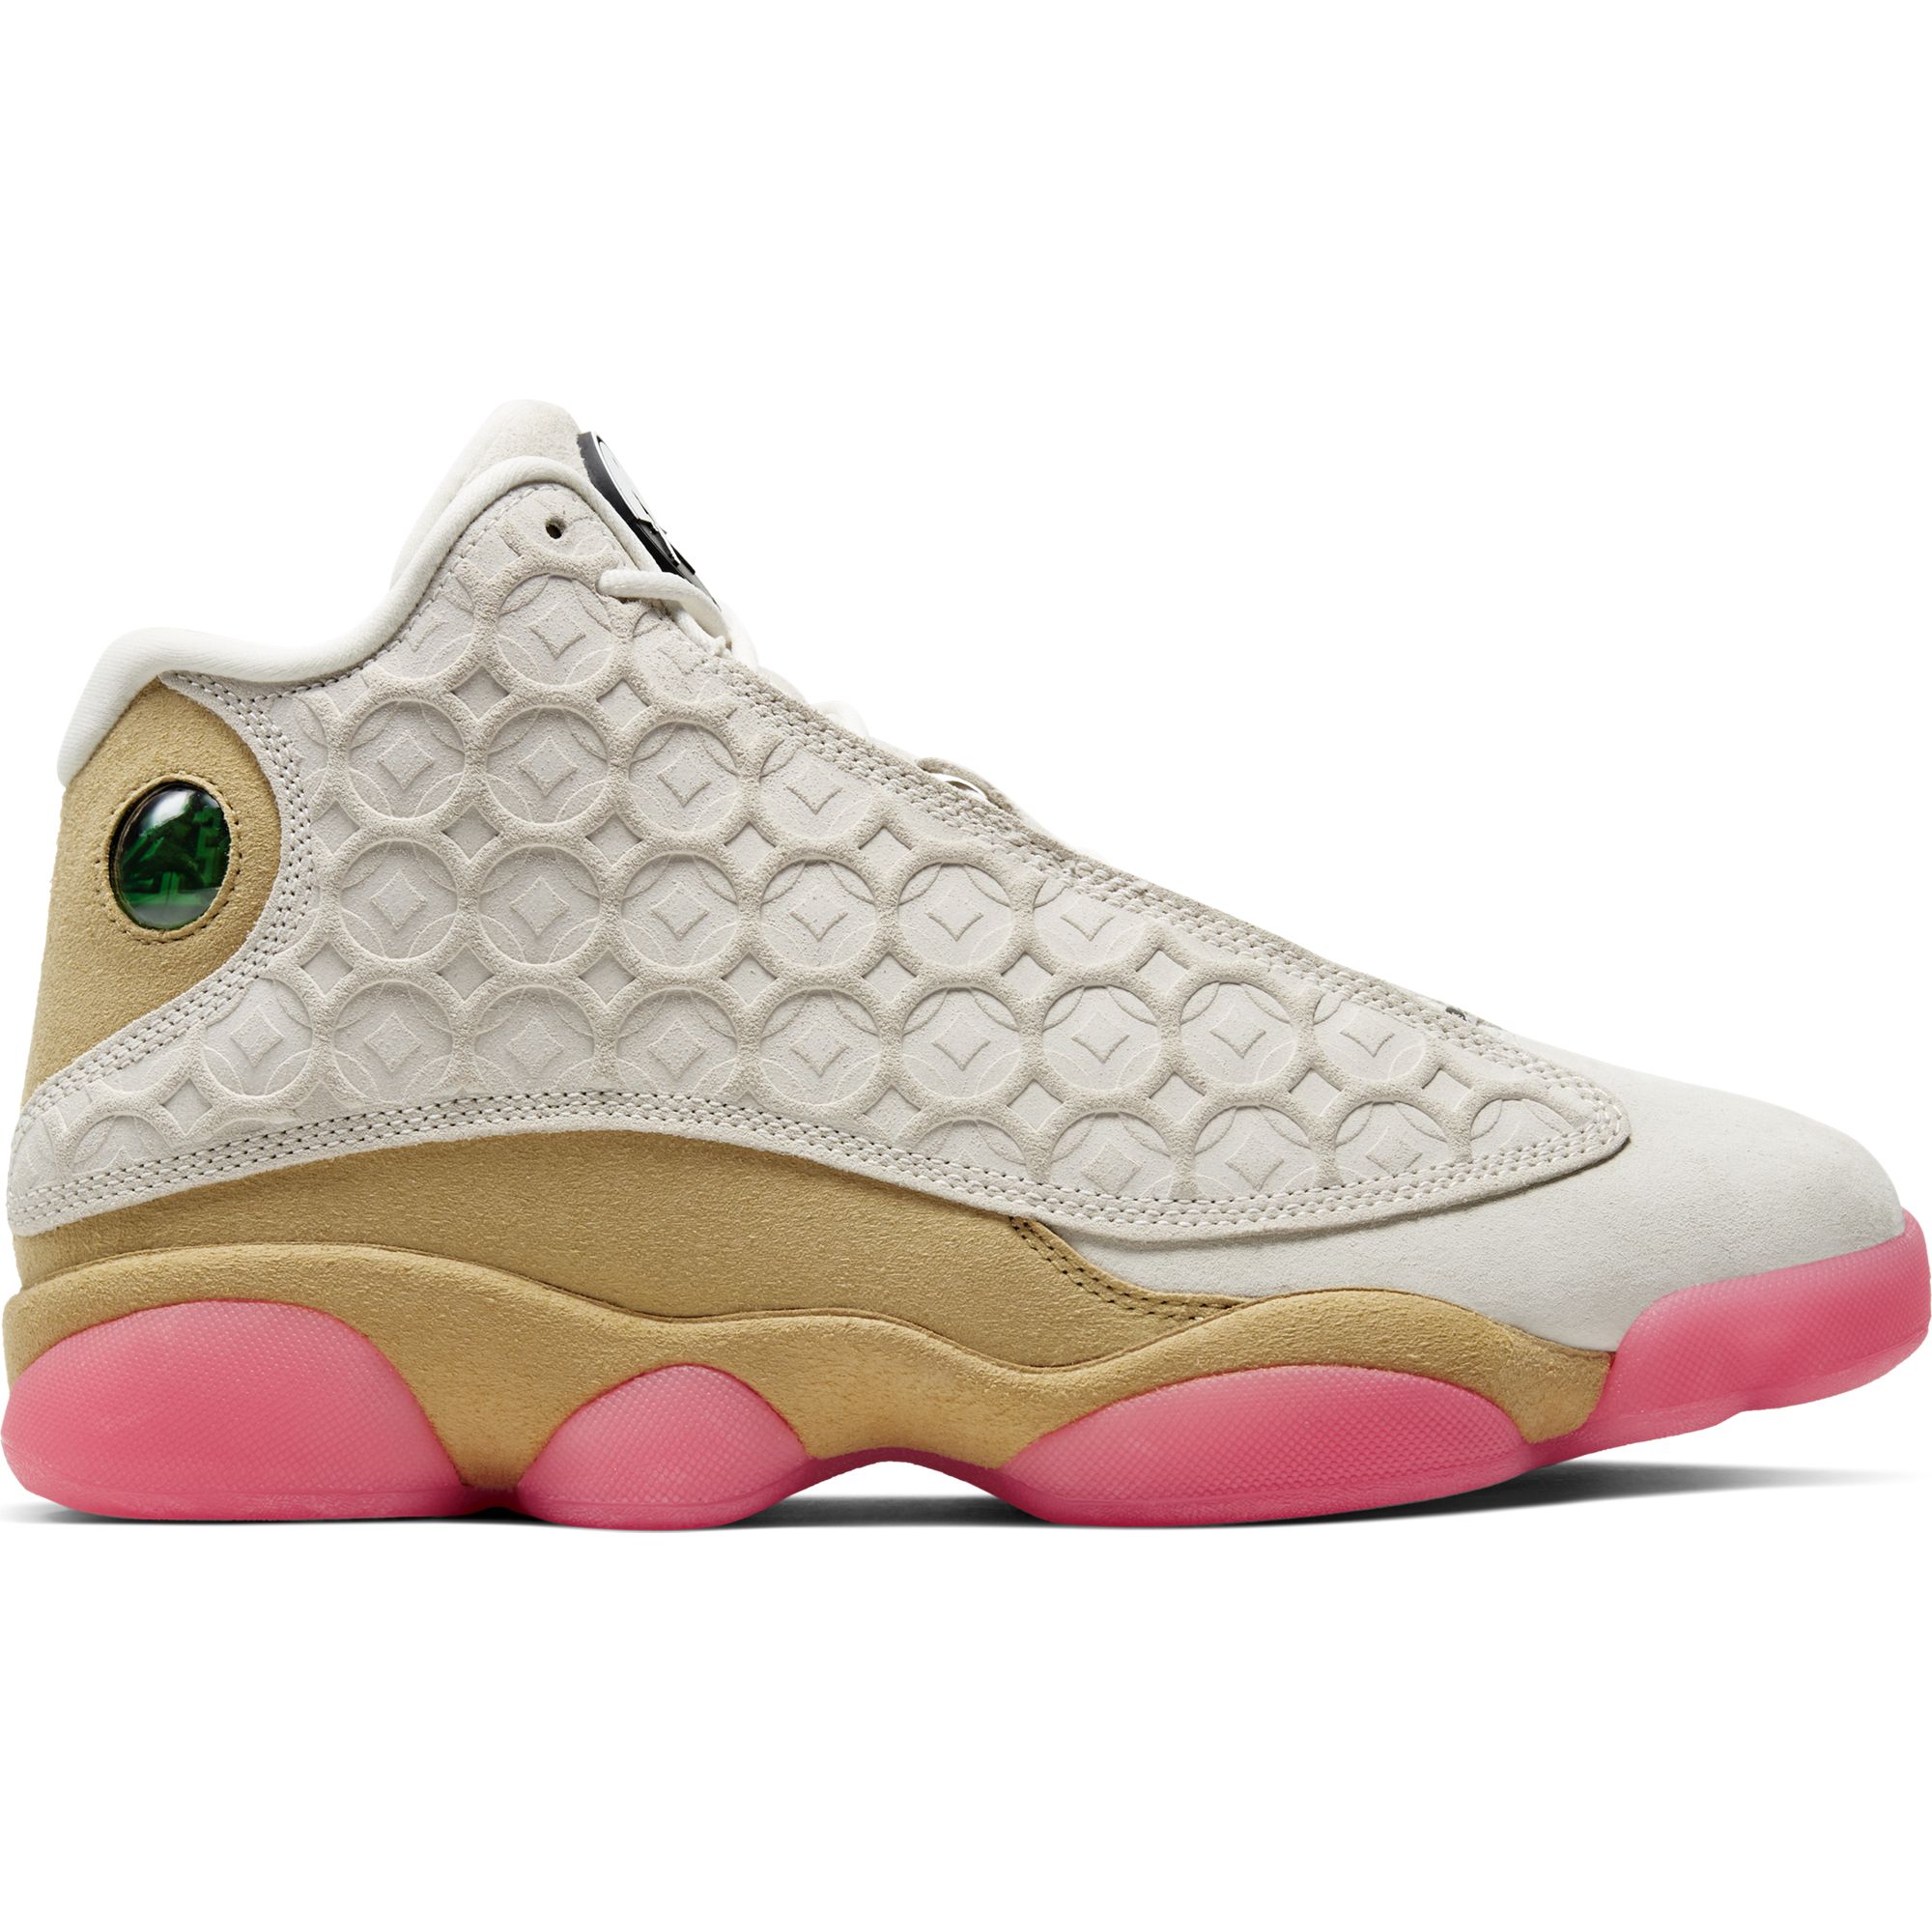 jordan 13 chinese new year release date